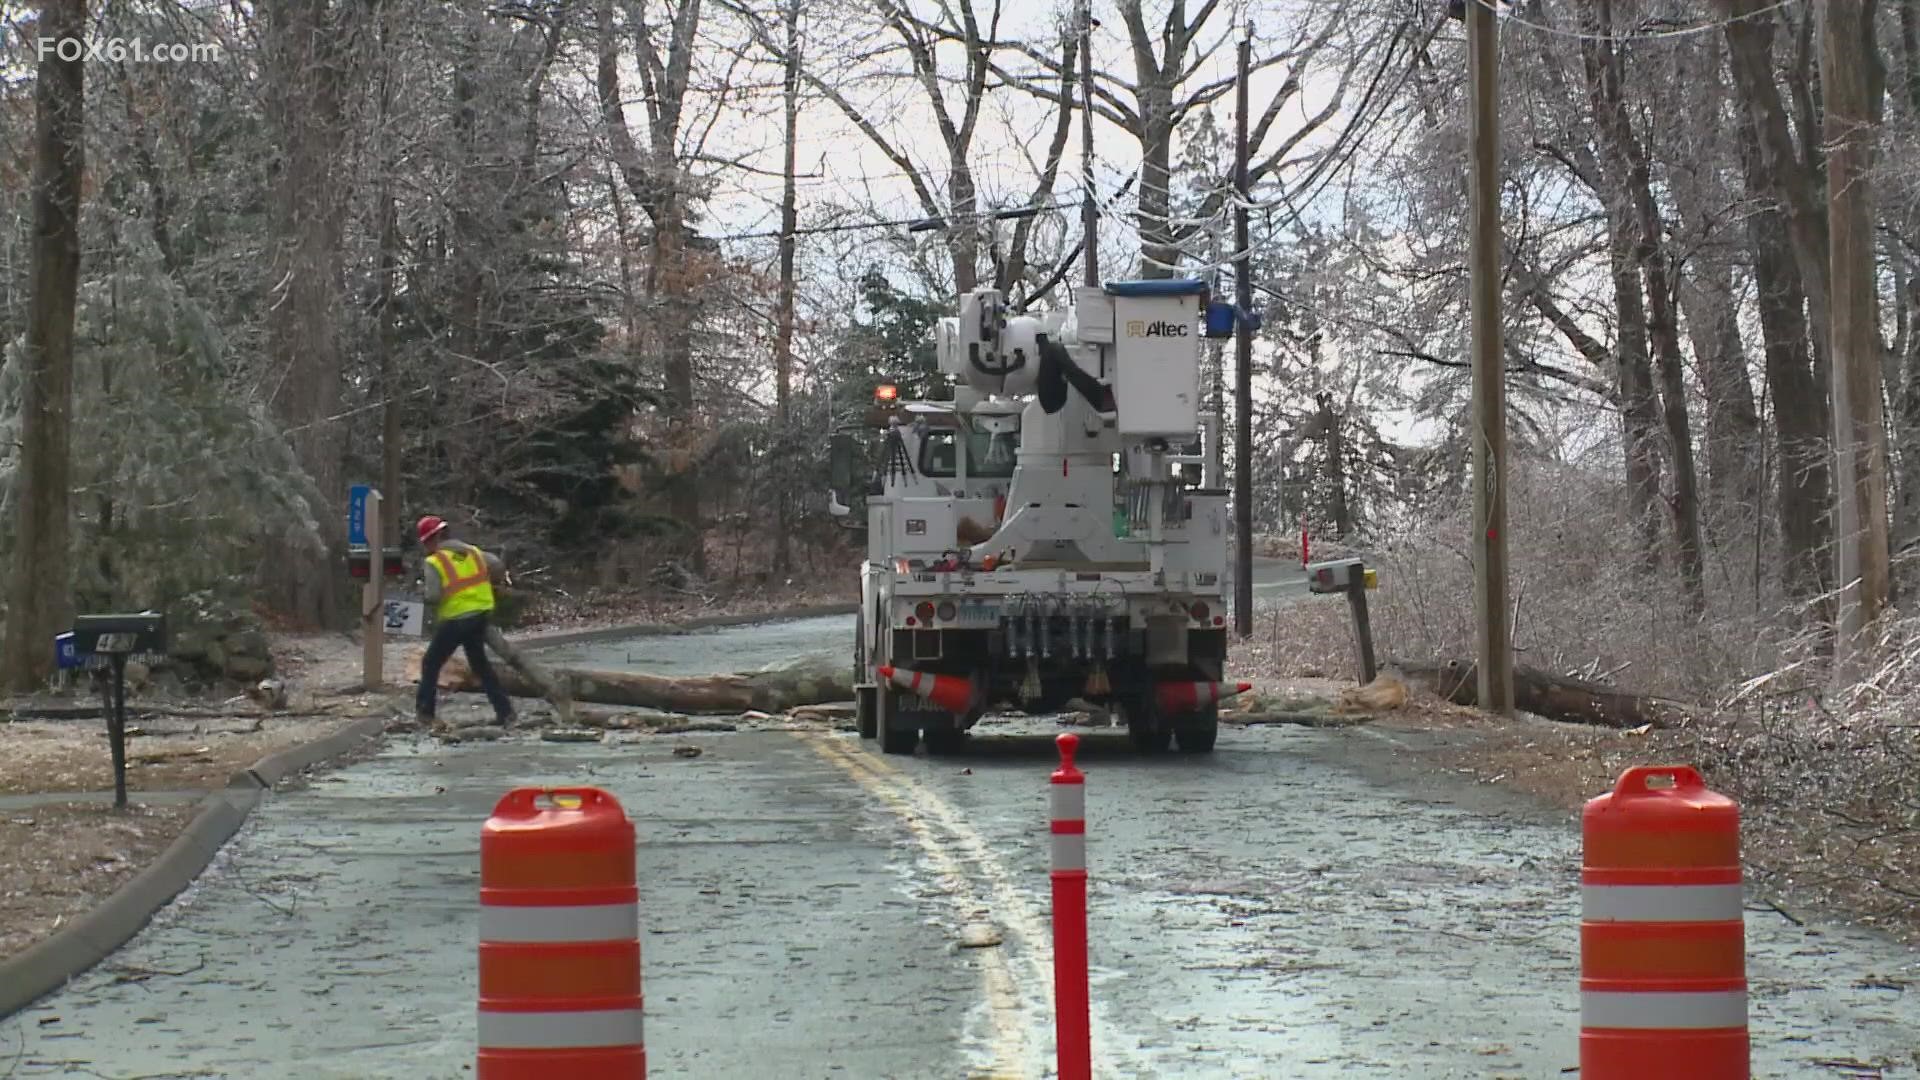 Eversource reported over 7,000 outages, the bulk of which were in Mansfield, Tolland, and New Hartford.